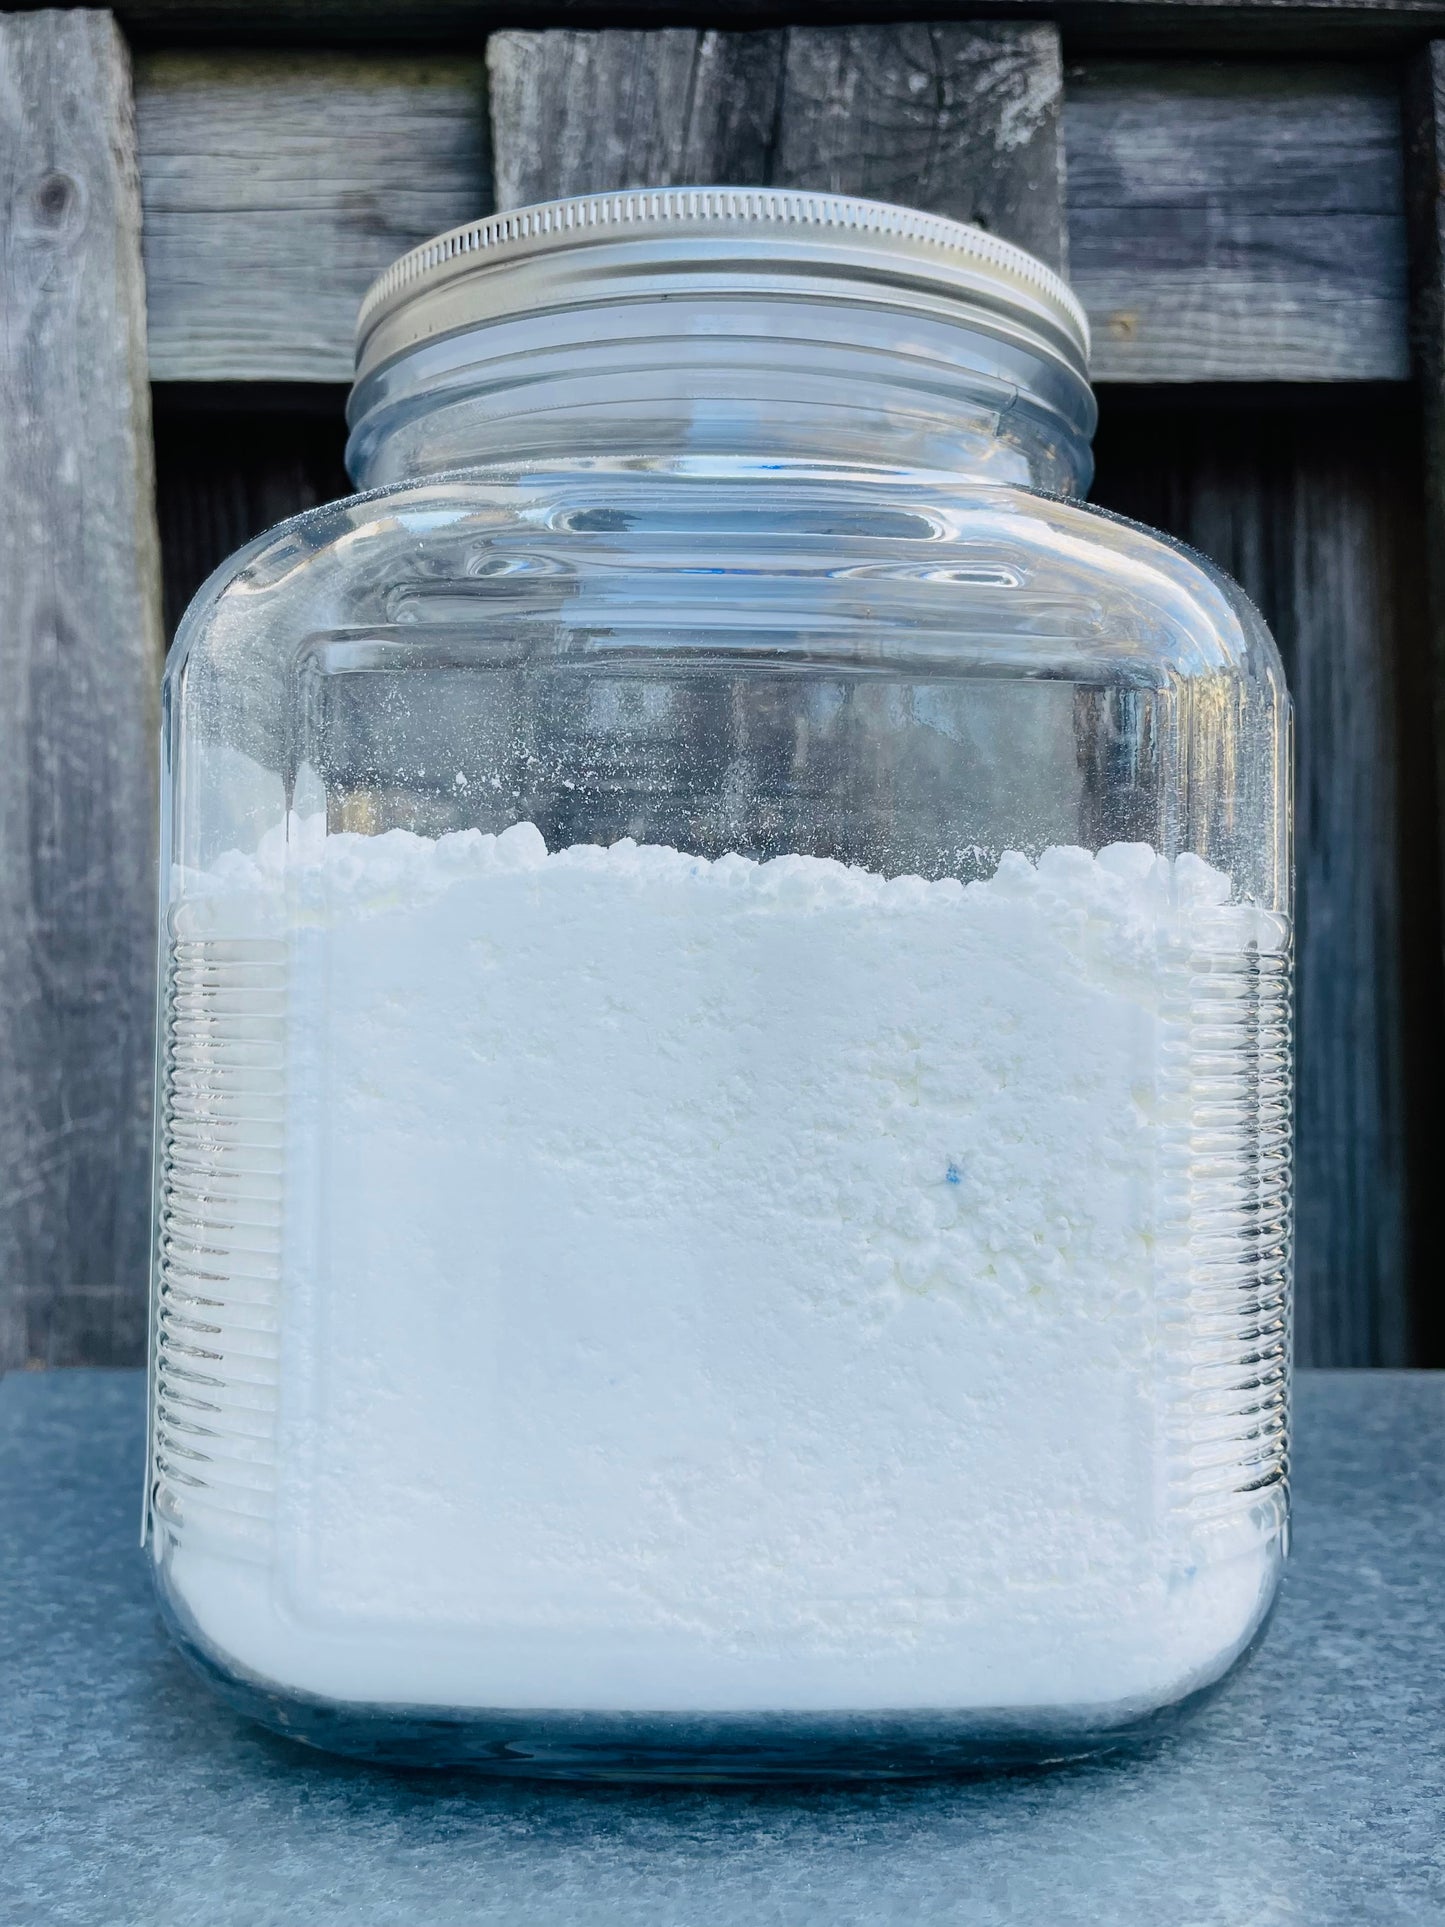 Starter Kit for our Non-Toxic Laundry Detergent 🧺 includes 1gallon jar+ Scooper+ 40-50 loads of detergent